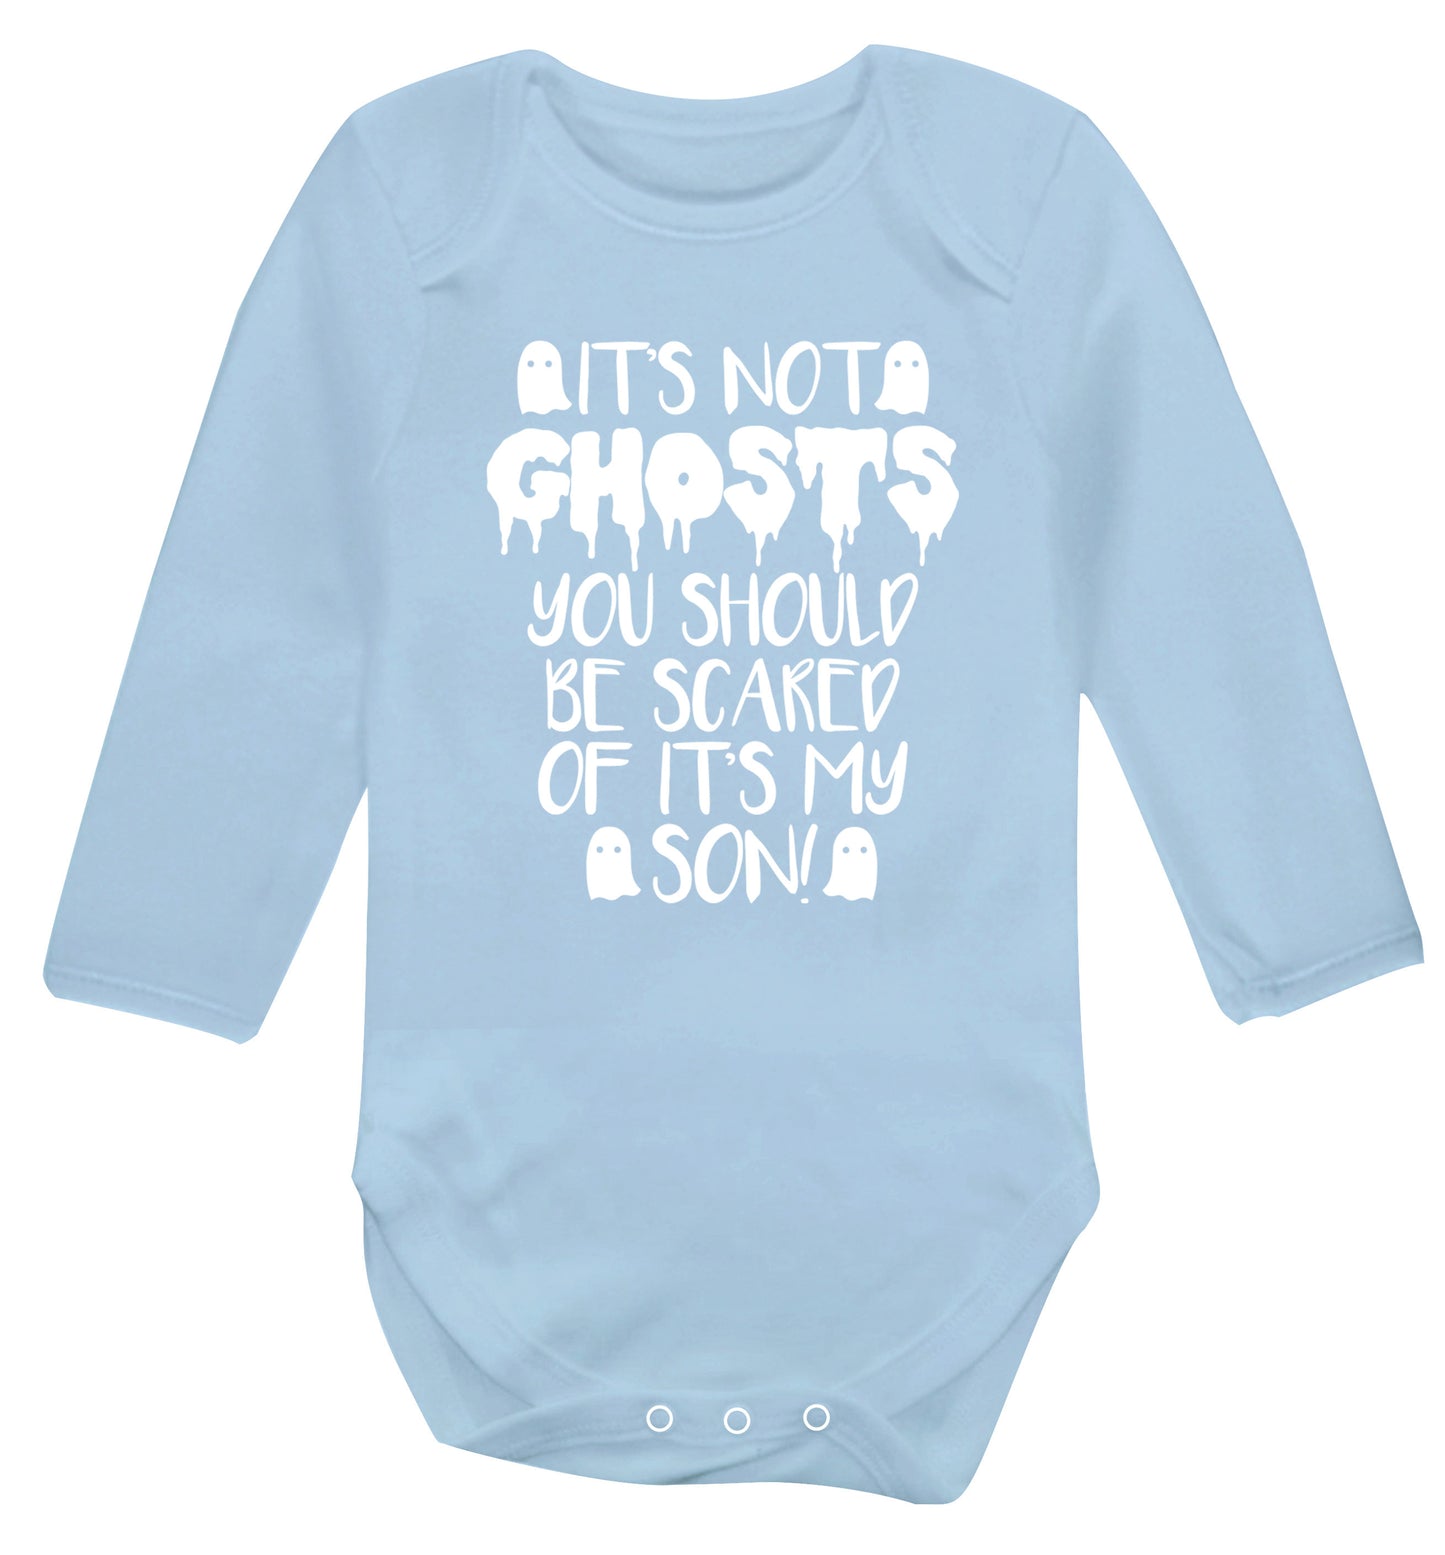 It's not ghosts you should be scared of it's my son! Baby Vest long sleeved pale blue 6-12 months